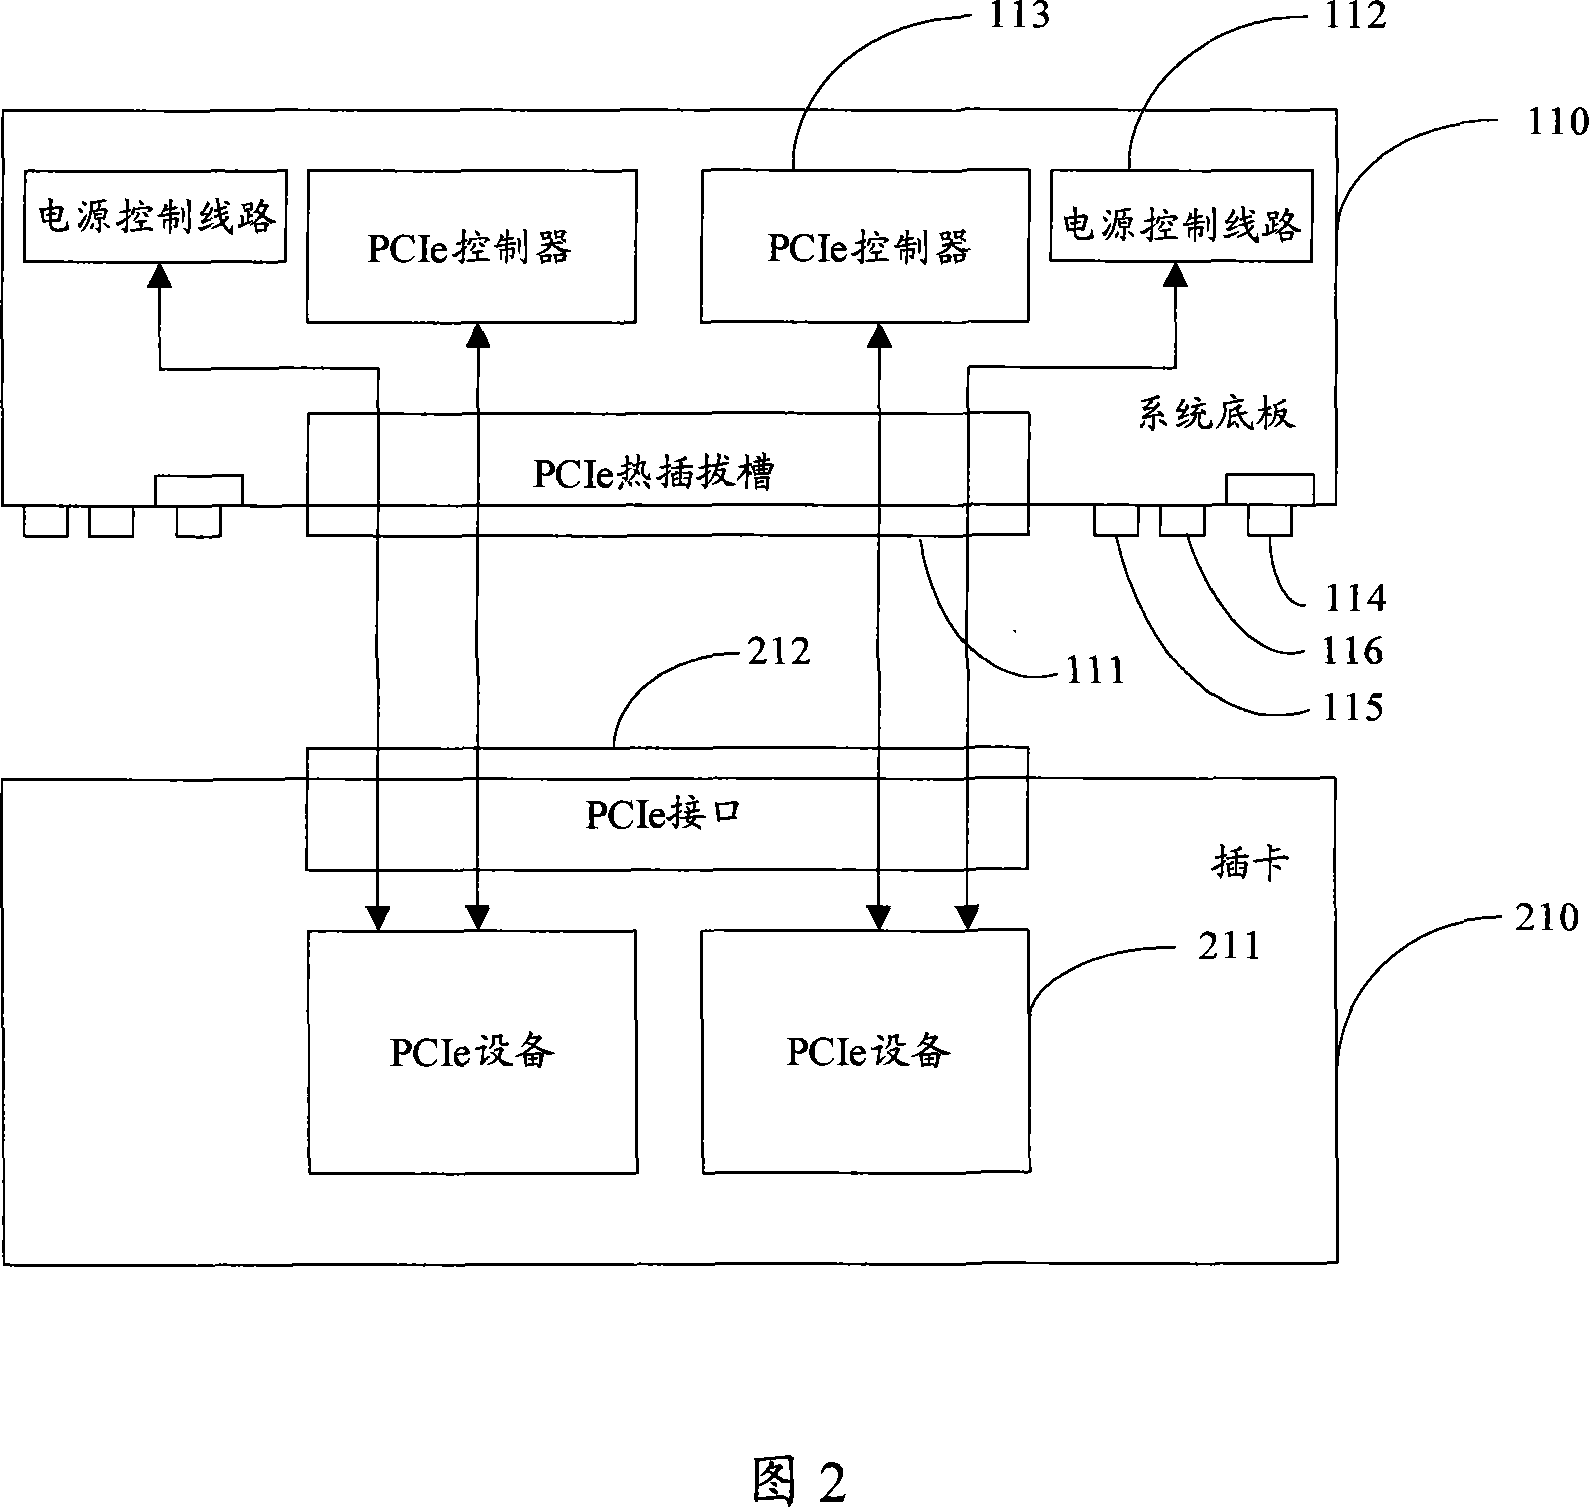 Method and device for implementing peripheral element interface accelerate bus inserted card hot-plug